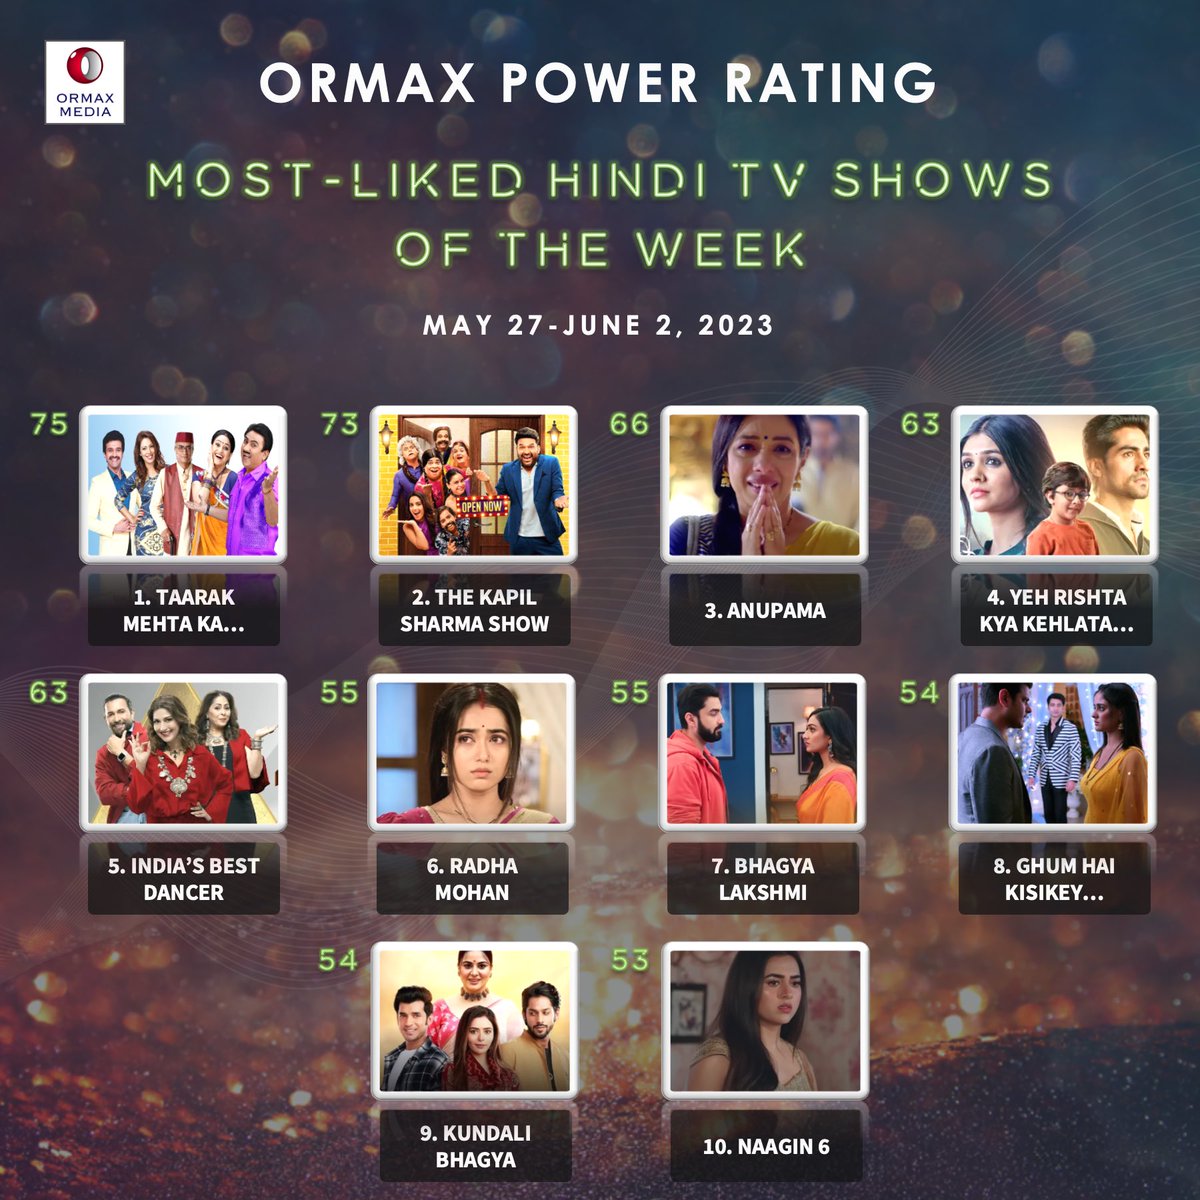 Most-liked Hindi TV shows (May 27-Jun 2) based on audience engagement #OrmaxPowerRating